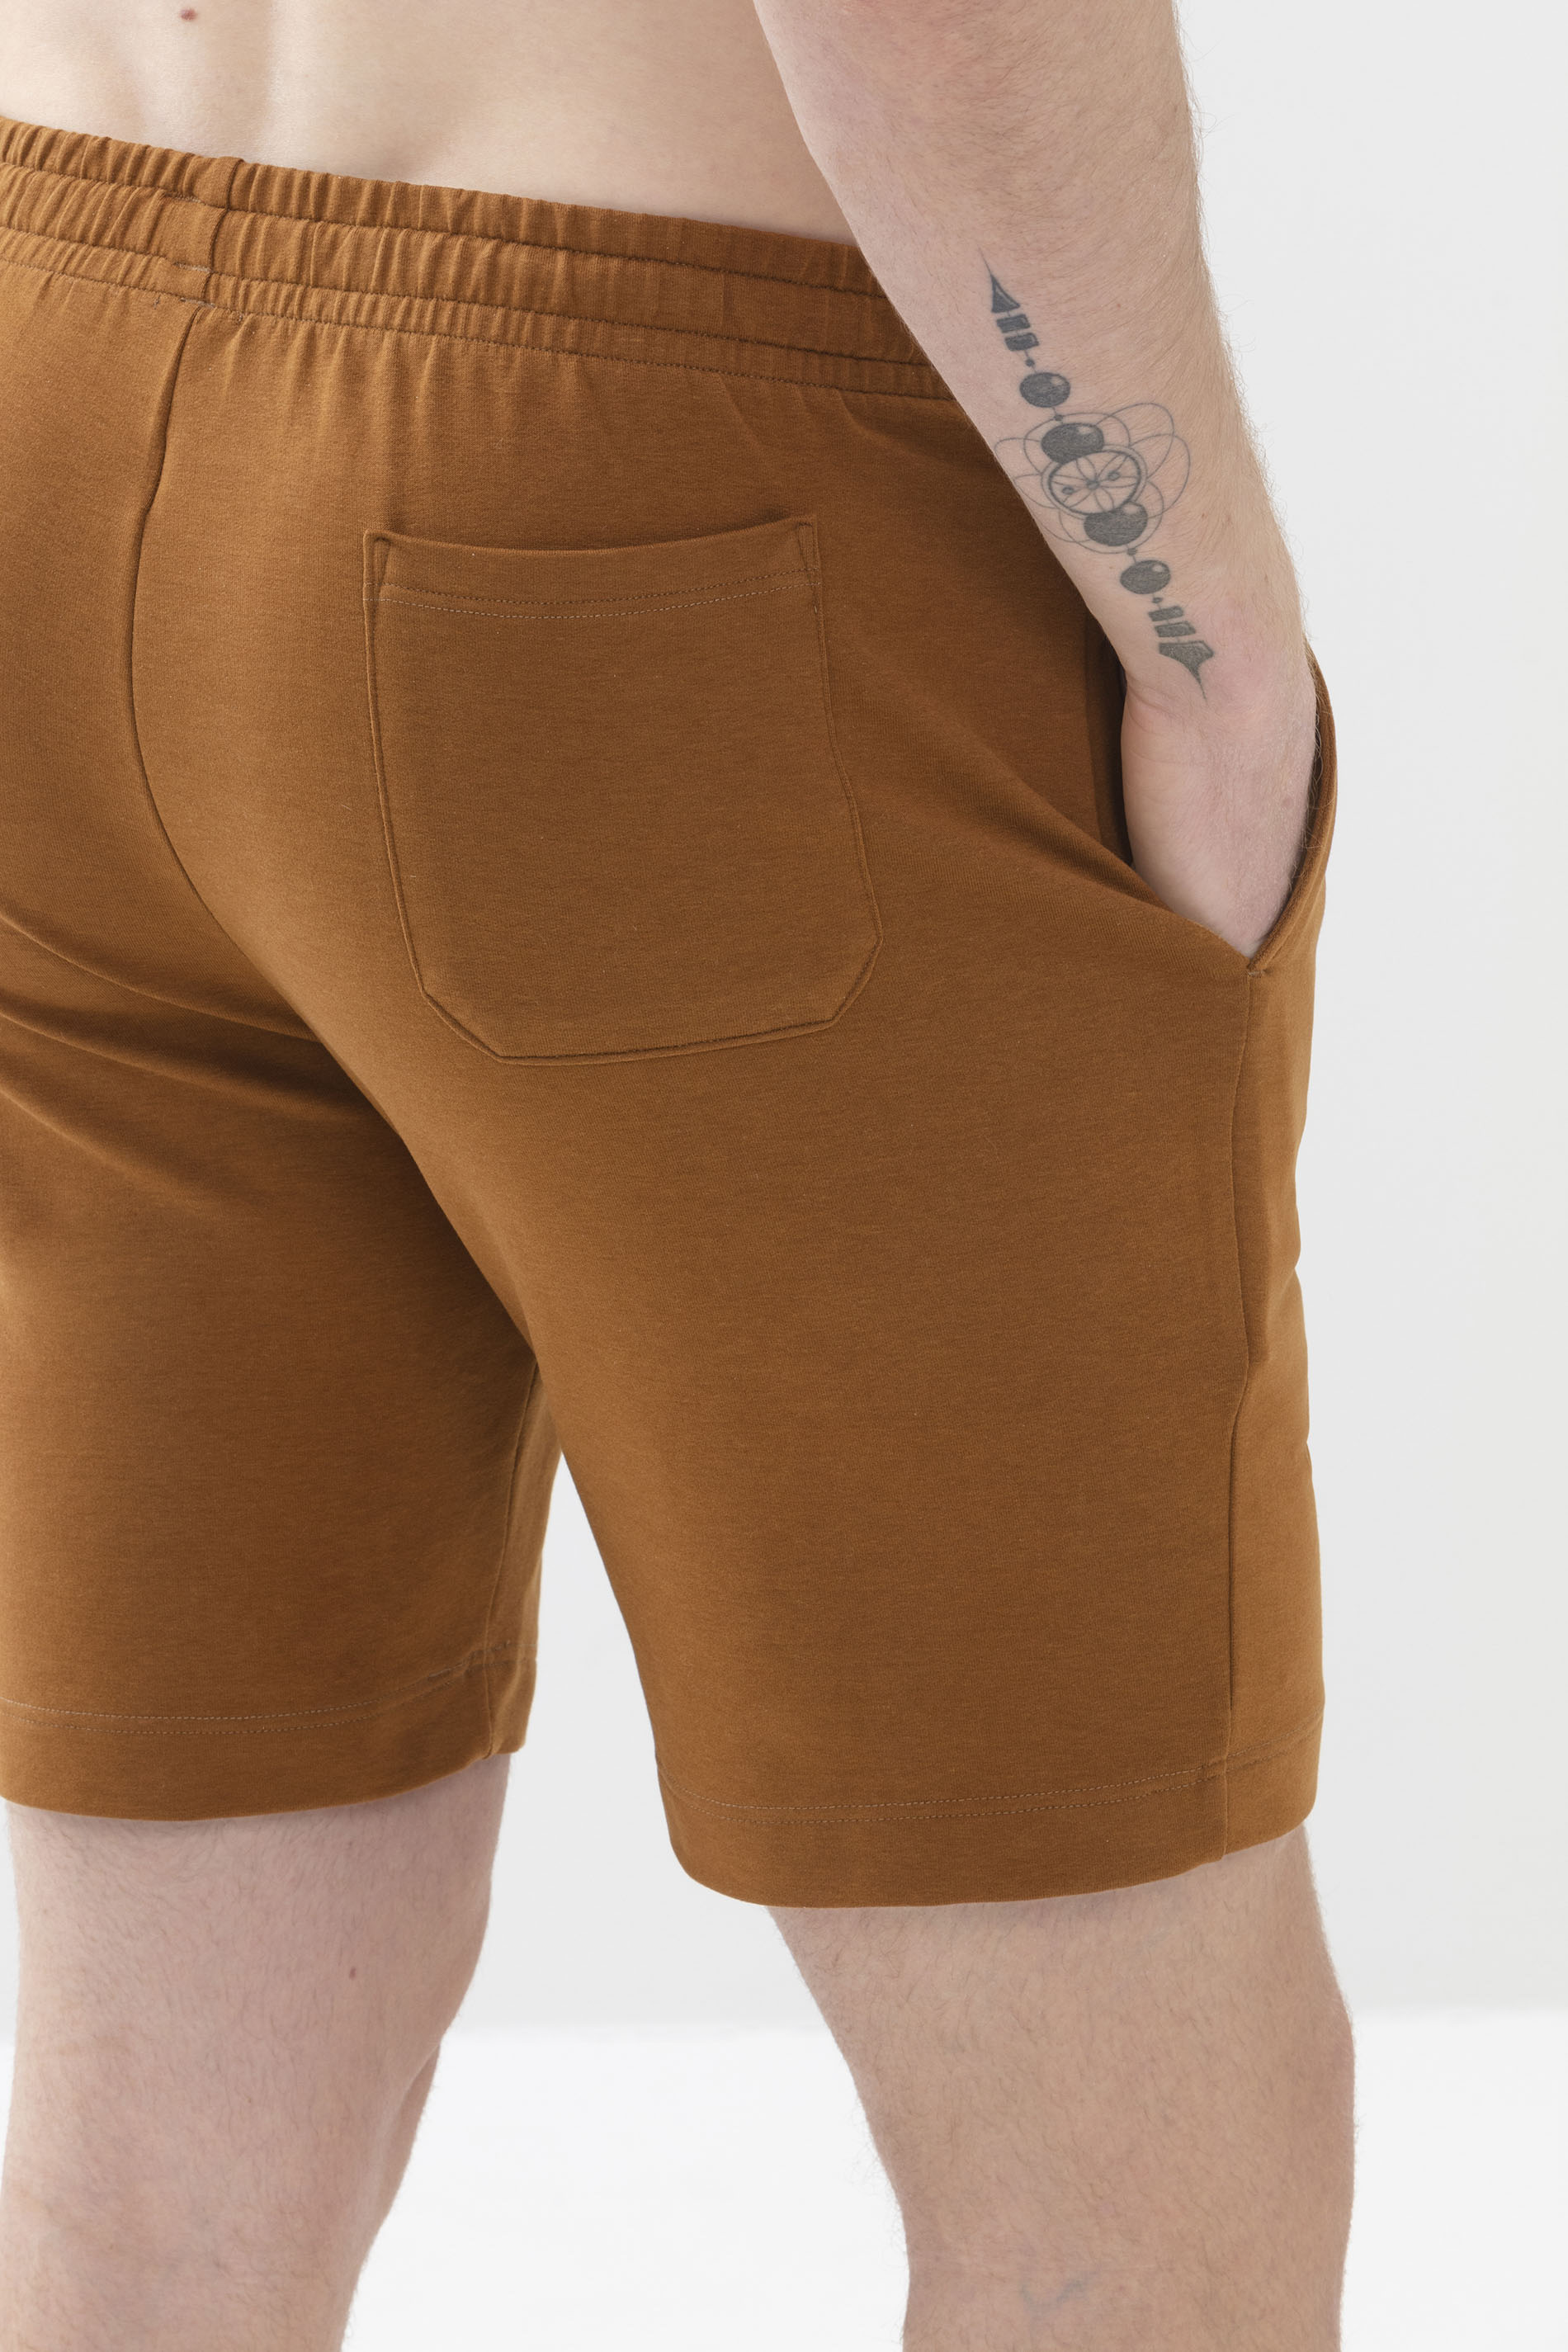 Shorts Brown Toffee Serie Enjoy Detail View 01 | mey®